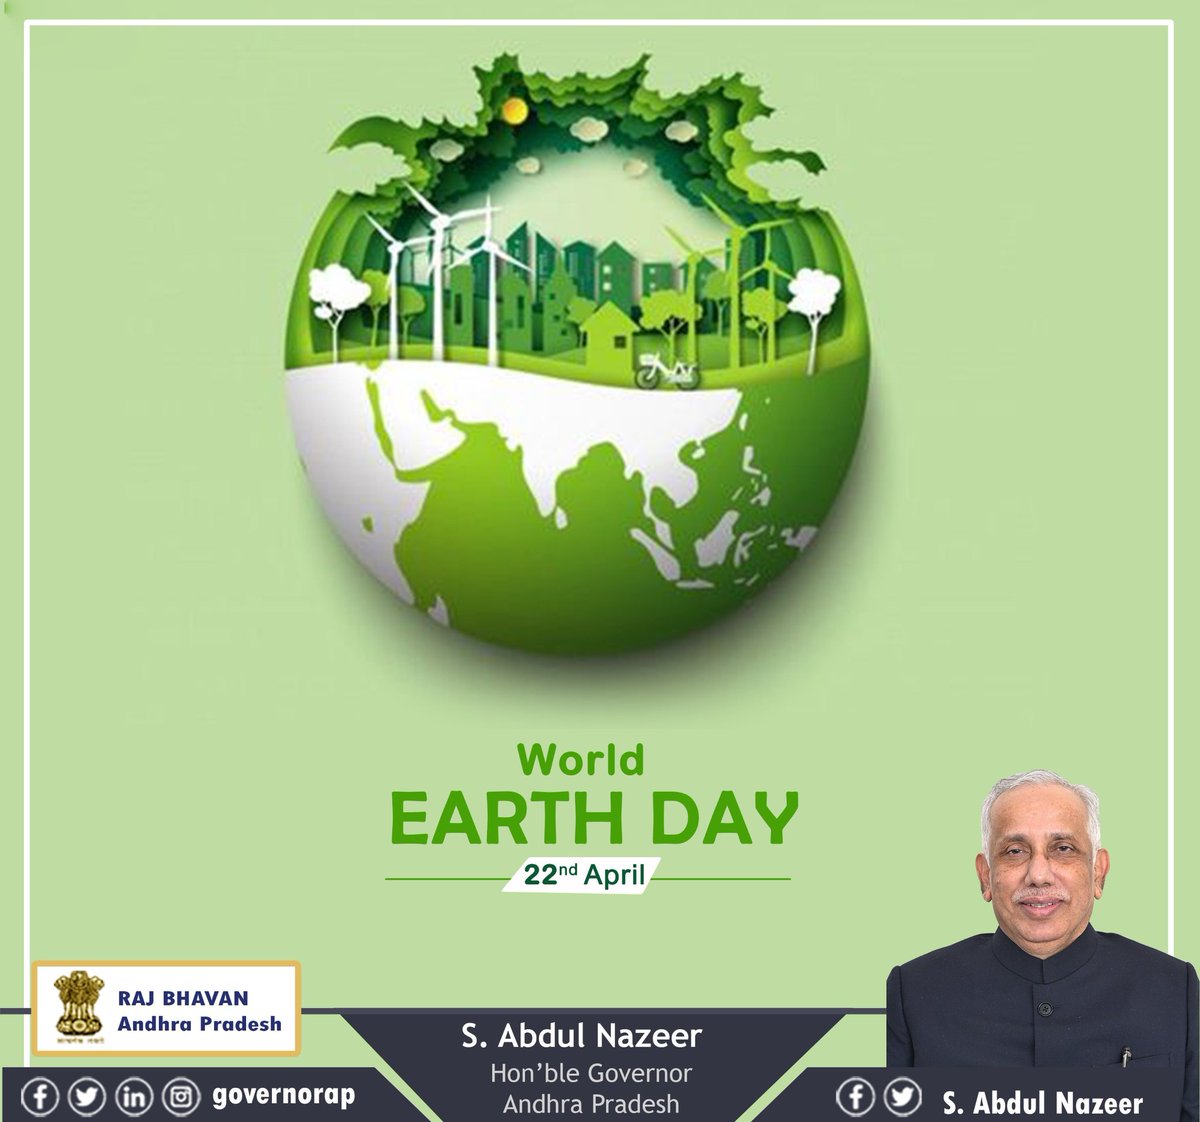 On 'World Earth Day' Governor of Andhra Pradesh Sri S. Abdul Nazeer said Climate change poses a biggest challenge to the future of the mankind. Let's pledge to keep our planet healthy by planting more trees and promoting harmony with nature for a better future of Planet Earth.